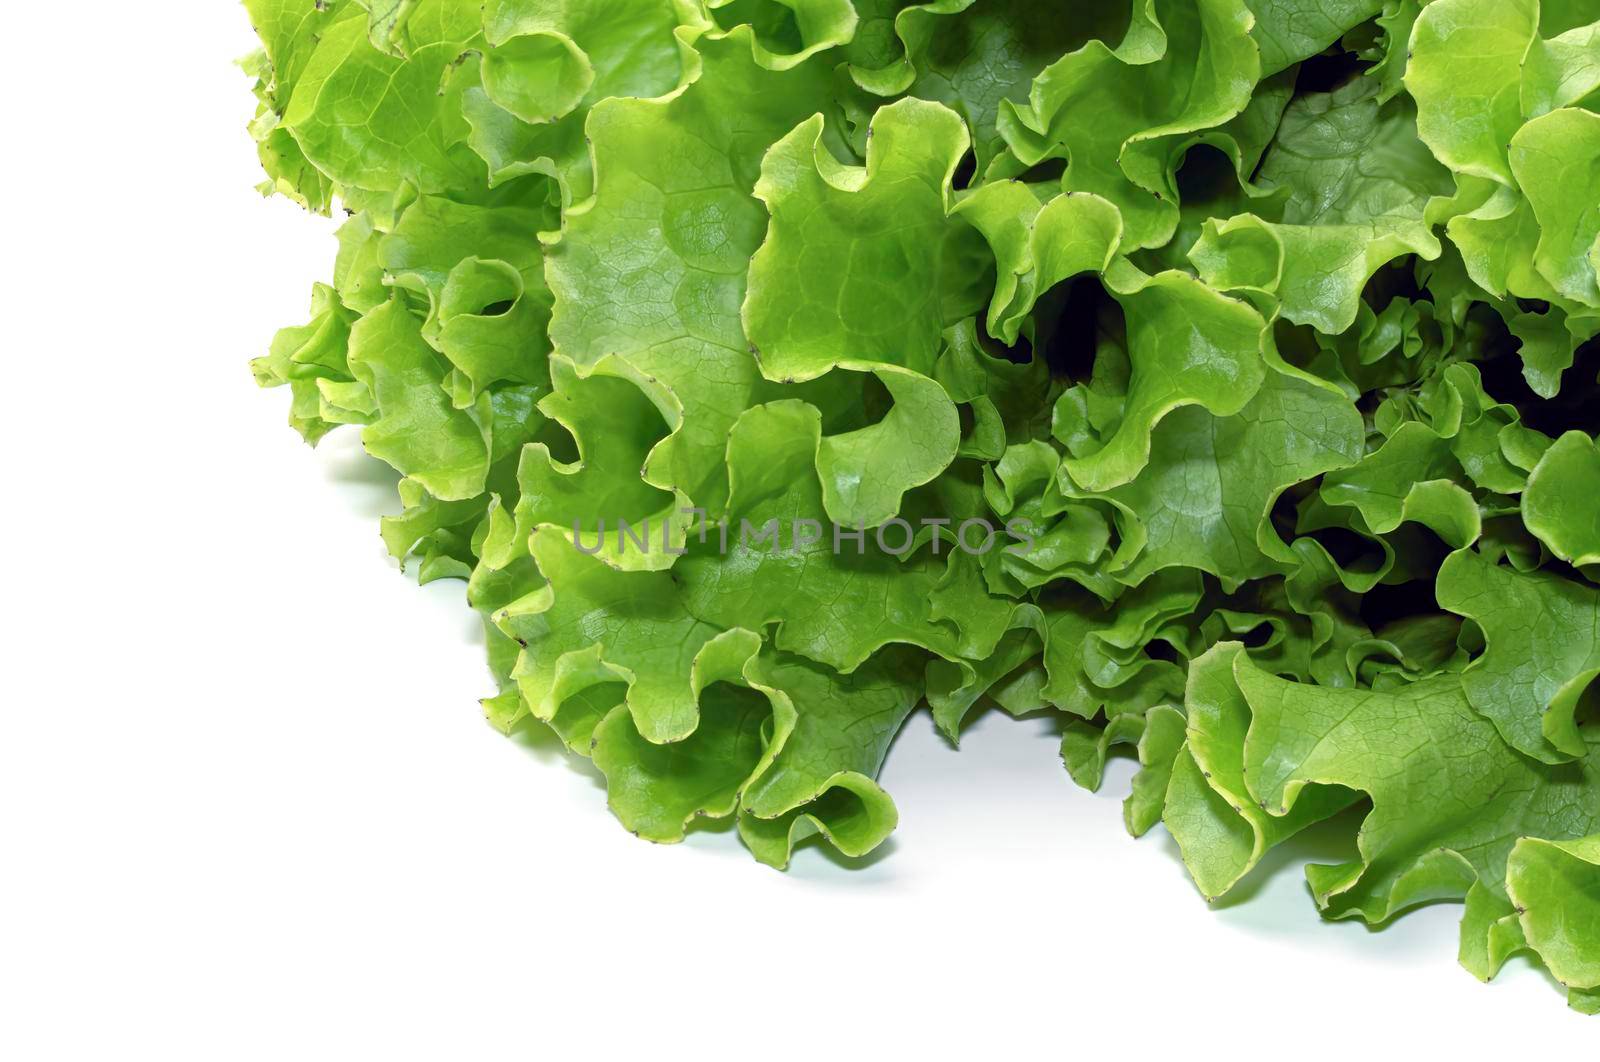 lettuce leaf on a white background close-up. isolate. High quality photo